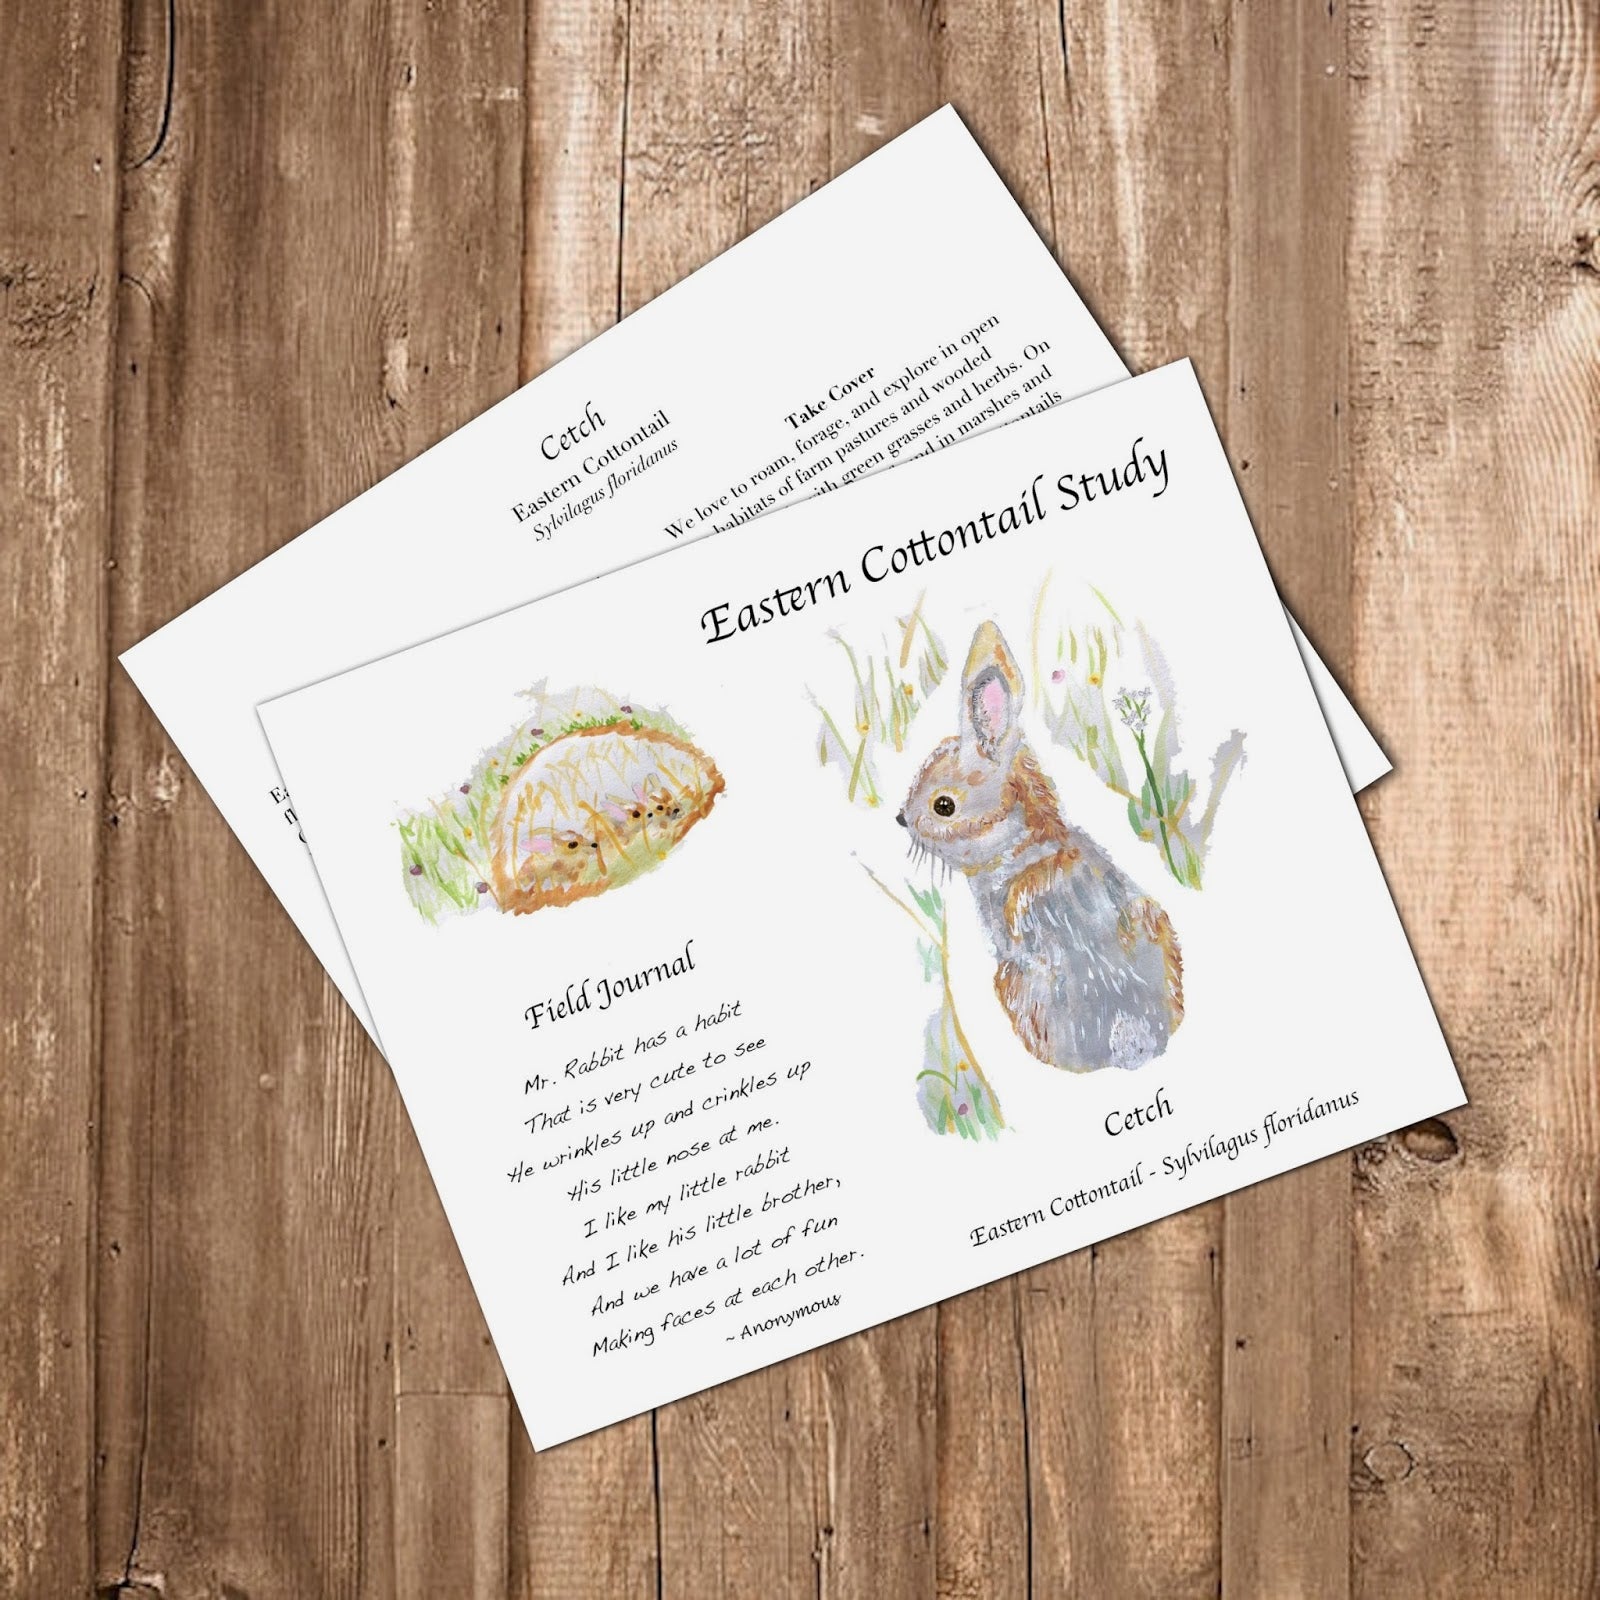 Pinecone Grove Eastern Cottontail Study